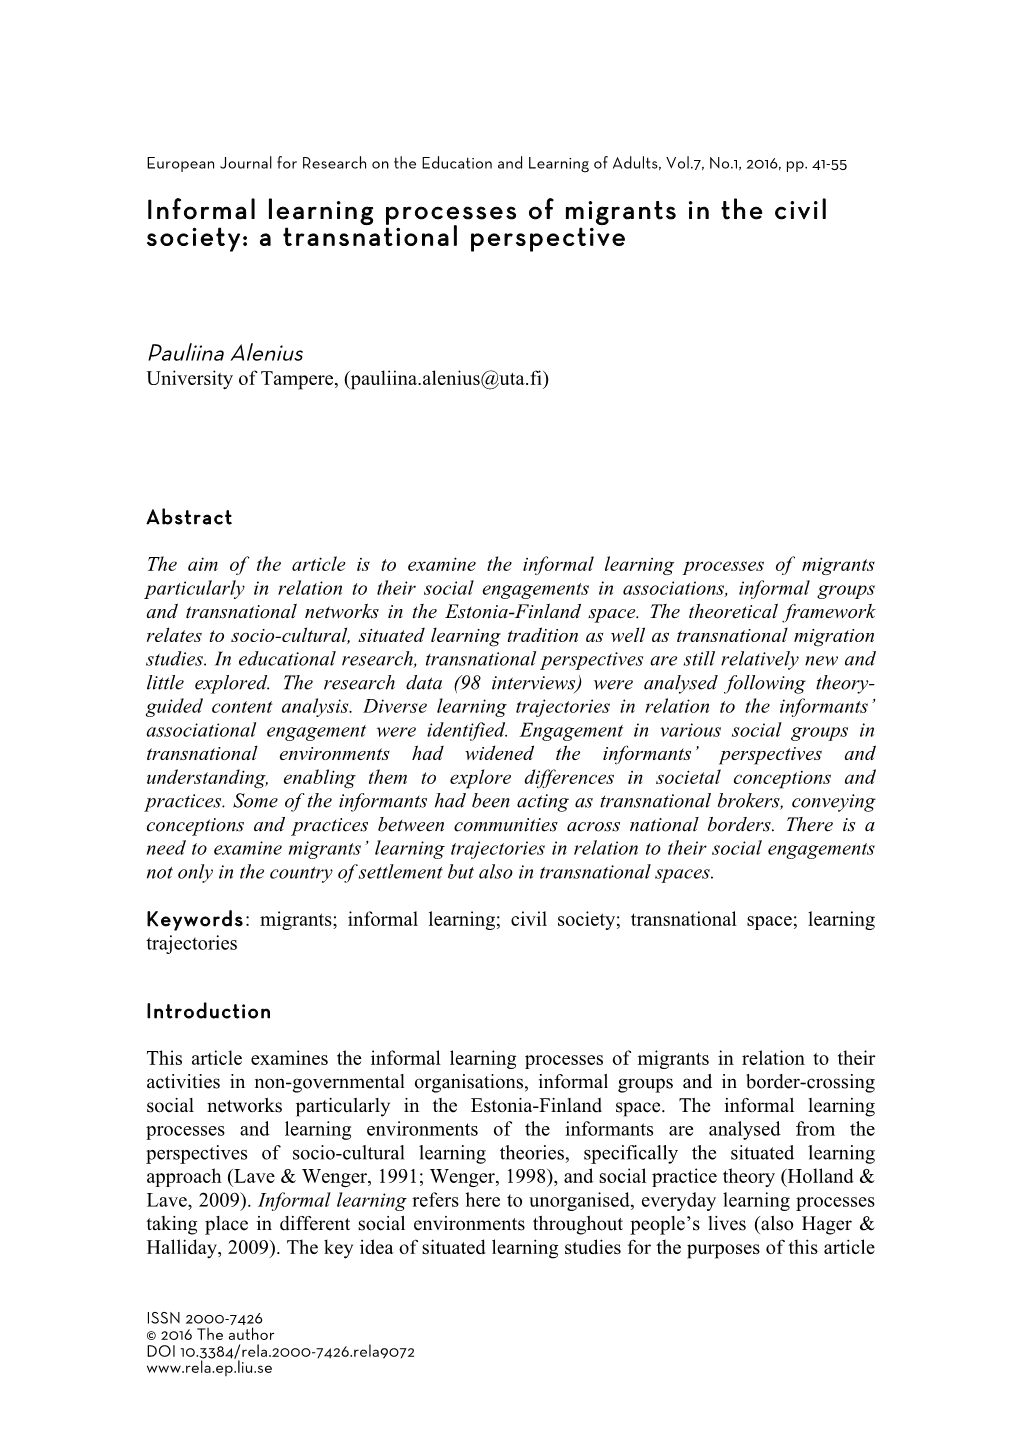 Informal Learning Processes of Migrants in the Civil Society: a Transnational Perspective